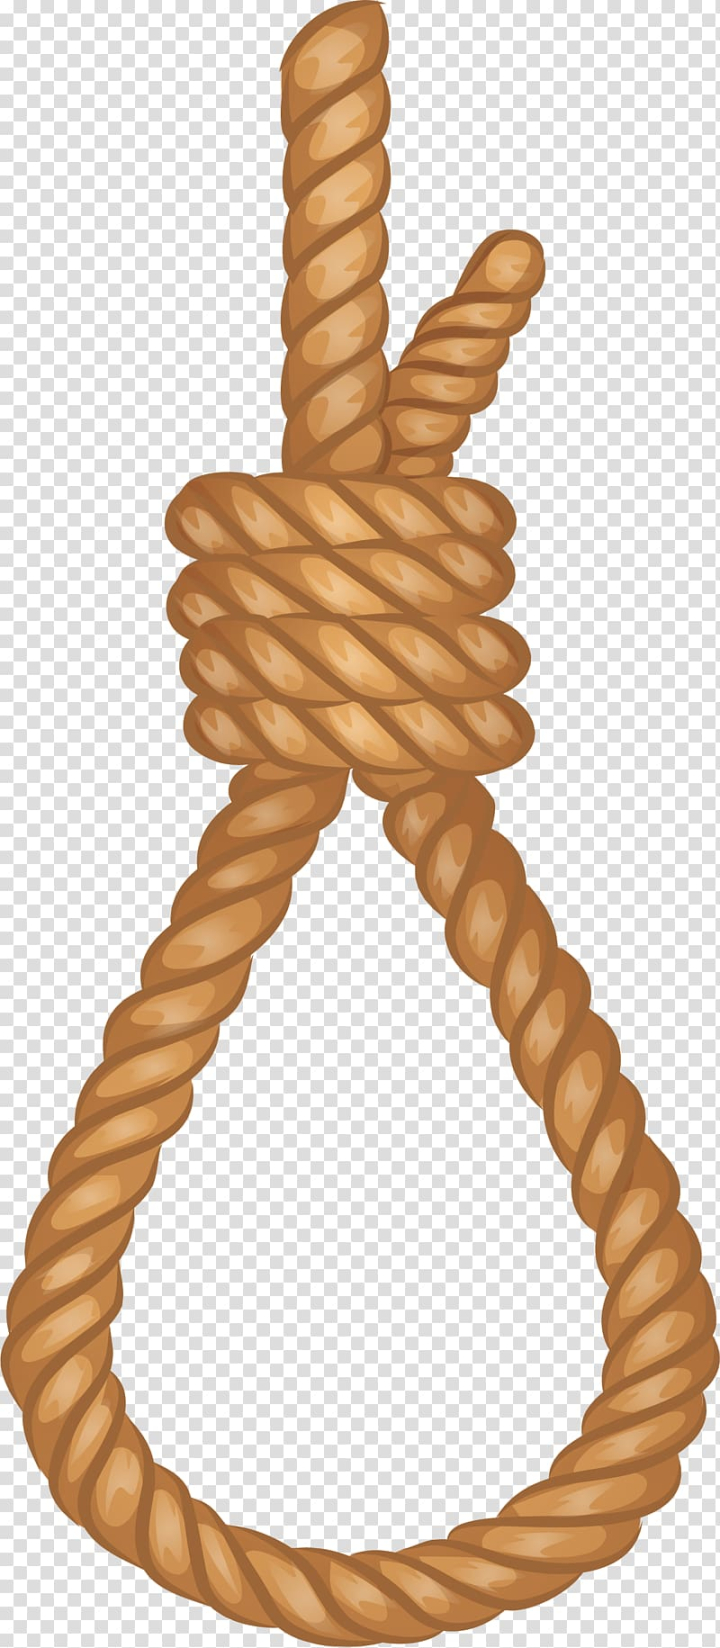 Free: Brown rope , Rope Computer file, Hanging rope transparent background  PNG clipart 